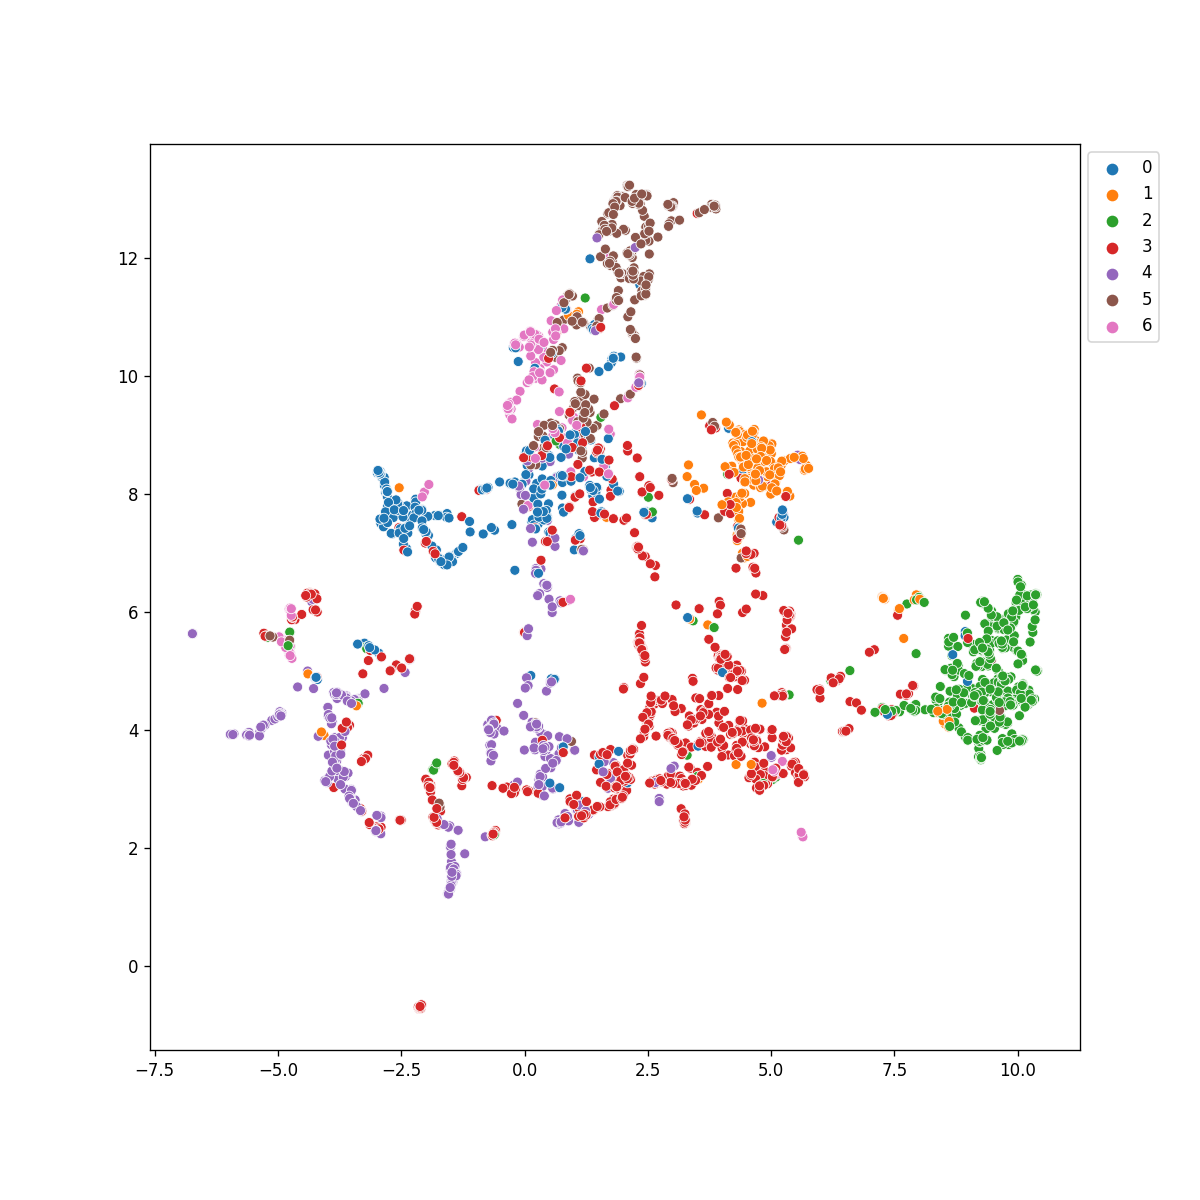 ast graph representation learning with pytorch geometric